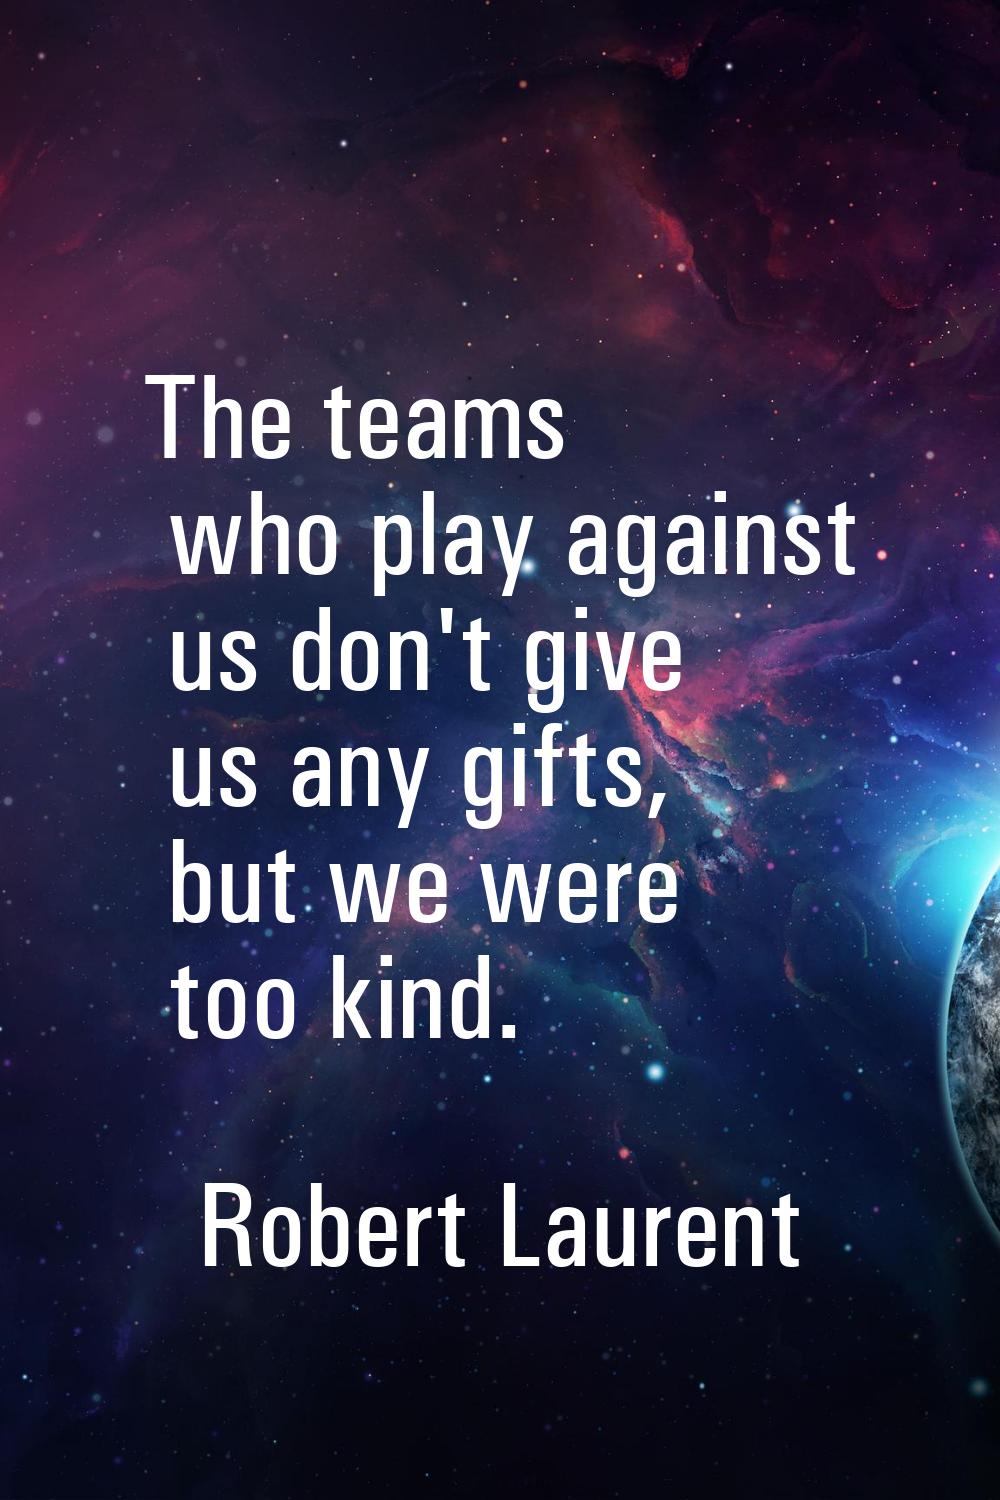 The teams who play against us don't give us any gifts, but we were too kind.